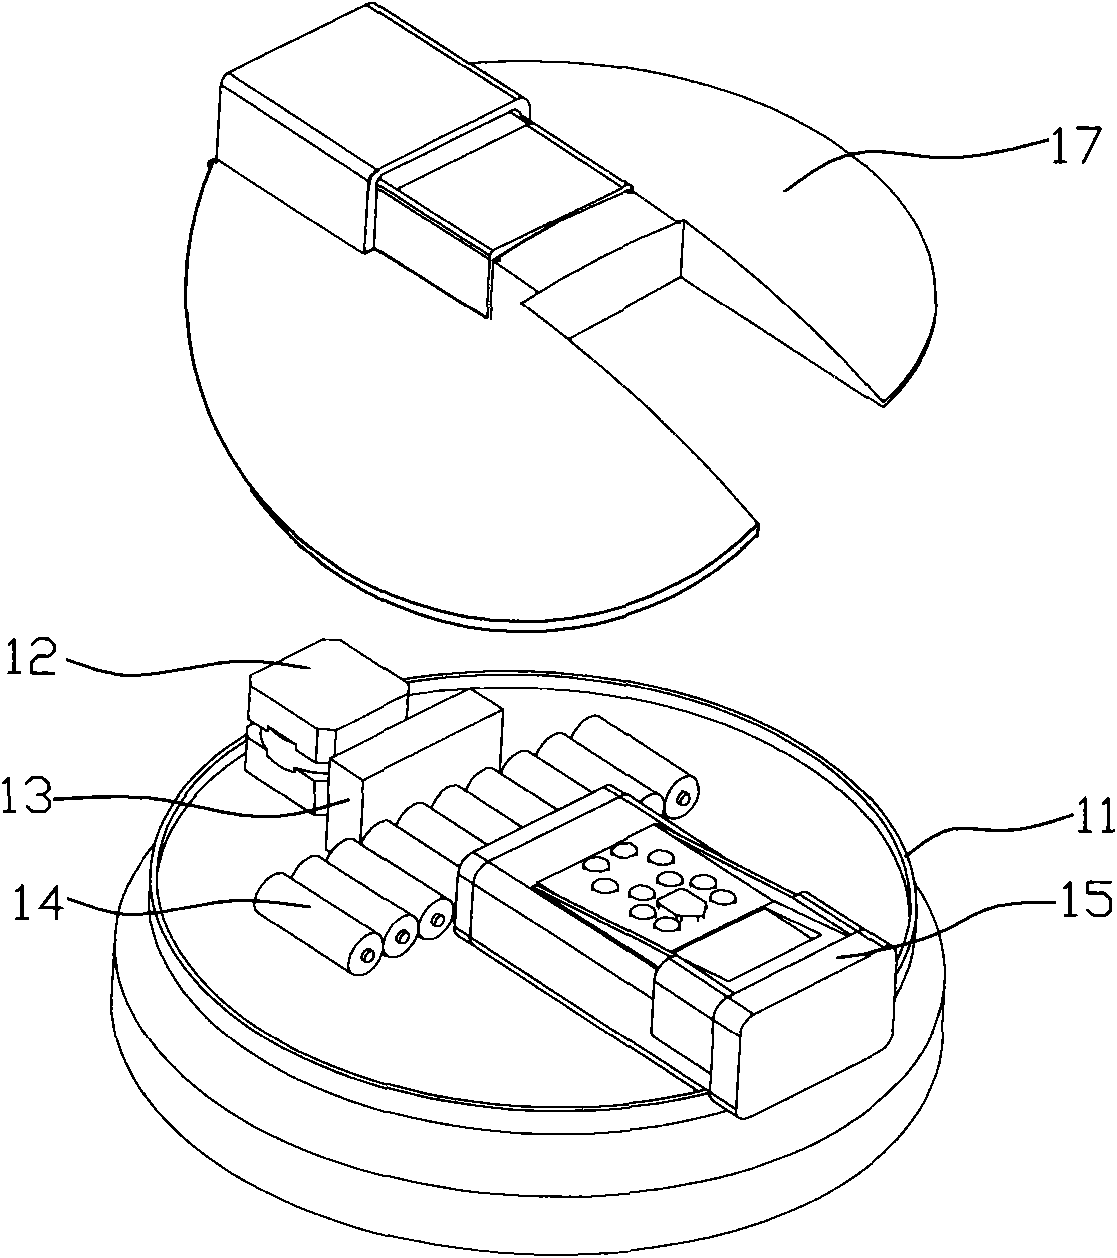 Method and device for scanning inner contour of buildings by using handheld rangefinder